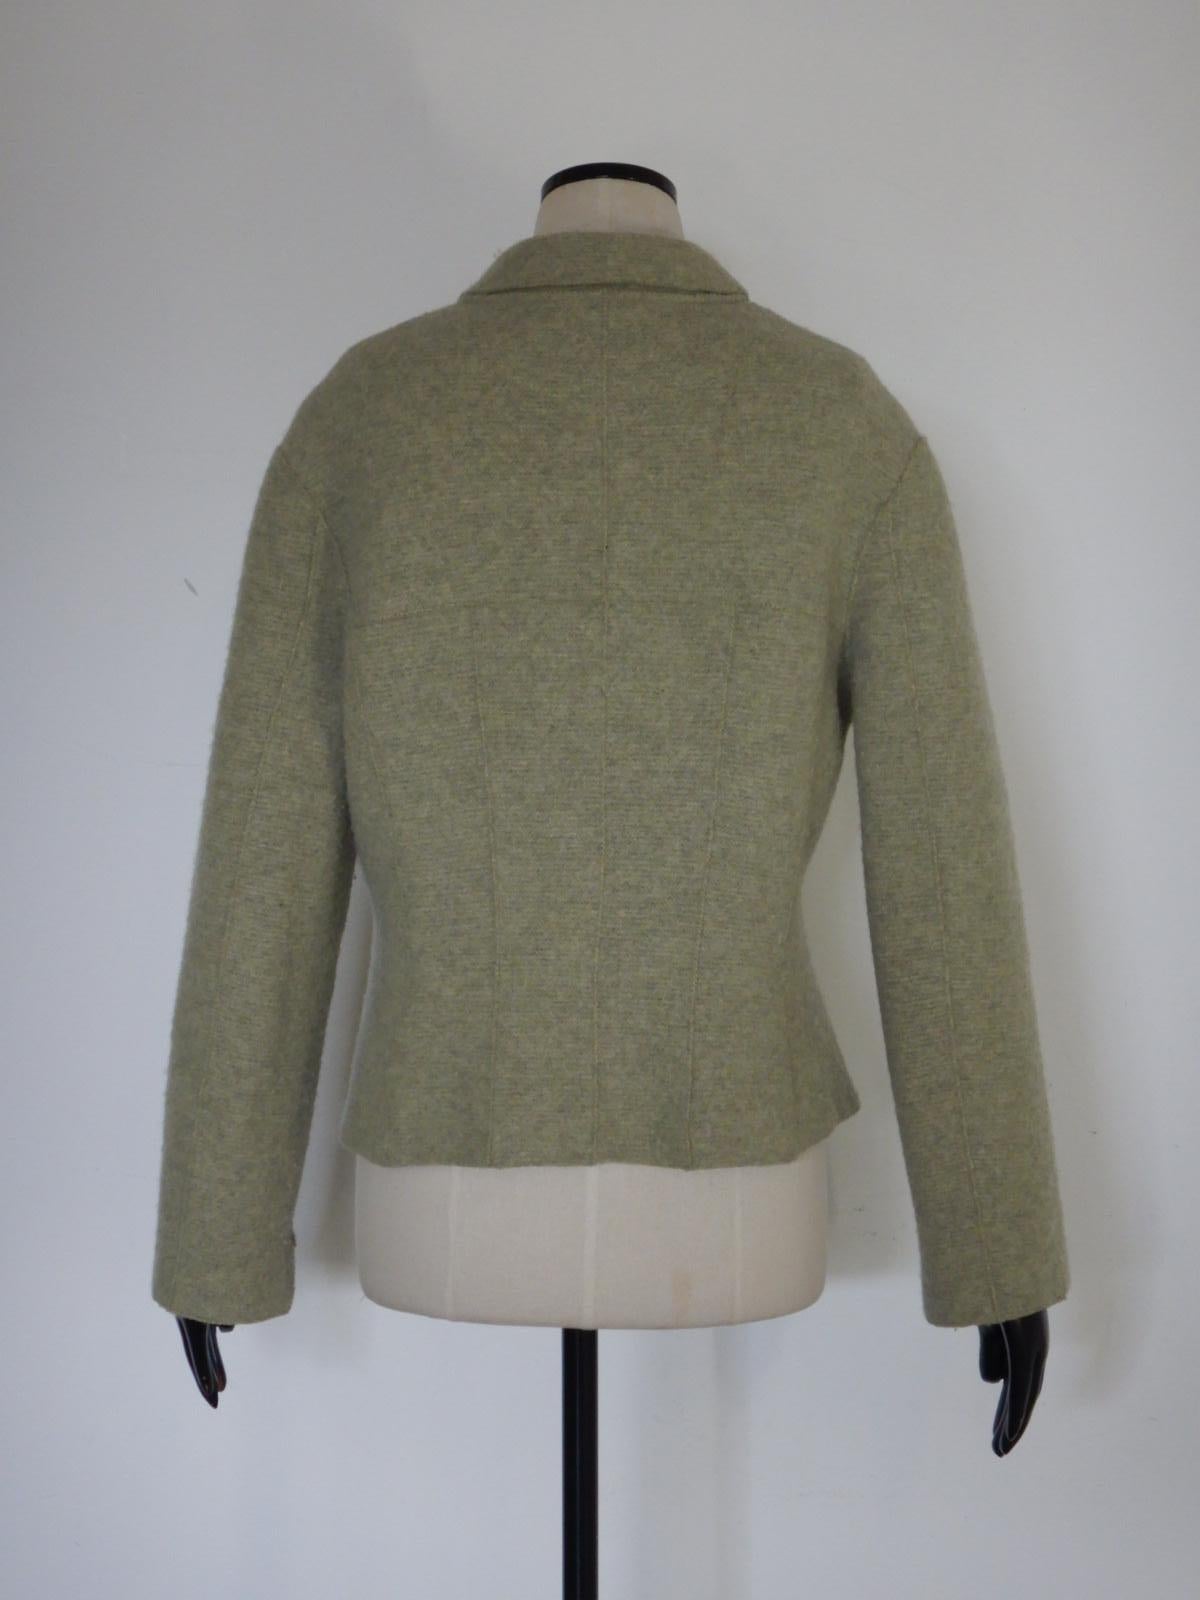 Chanel Autumn 1999 Green Wool Jacket In Good Condition For Sale In Oakland, CA